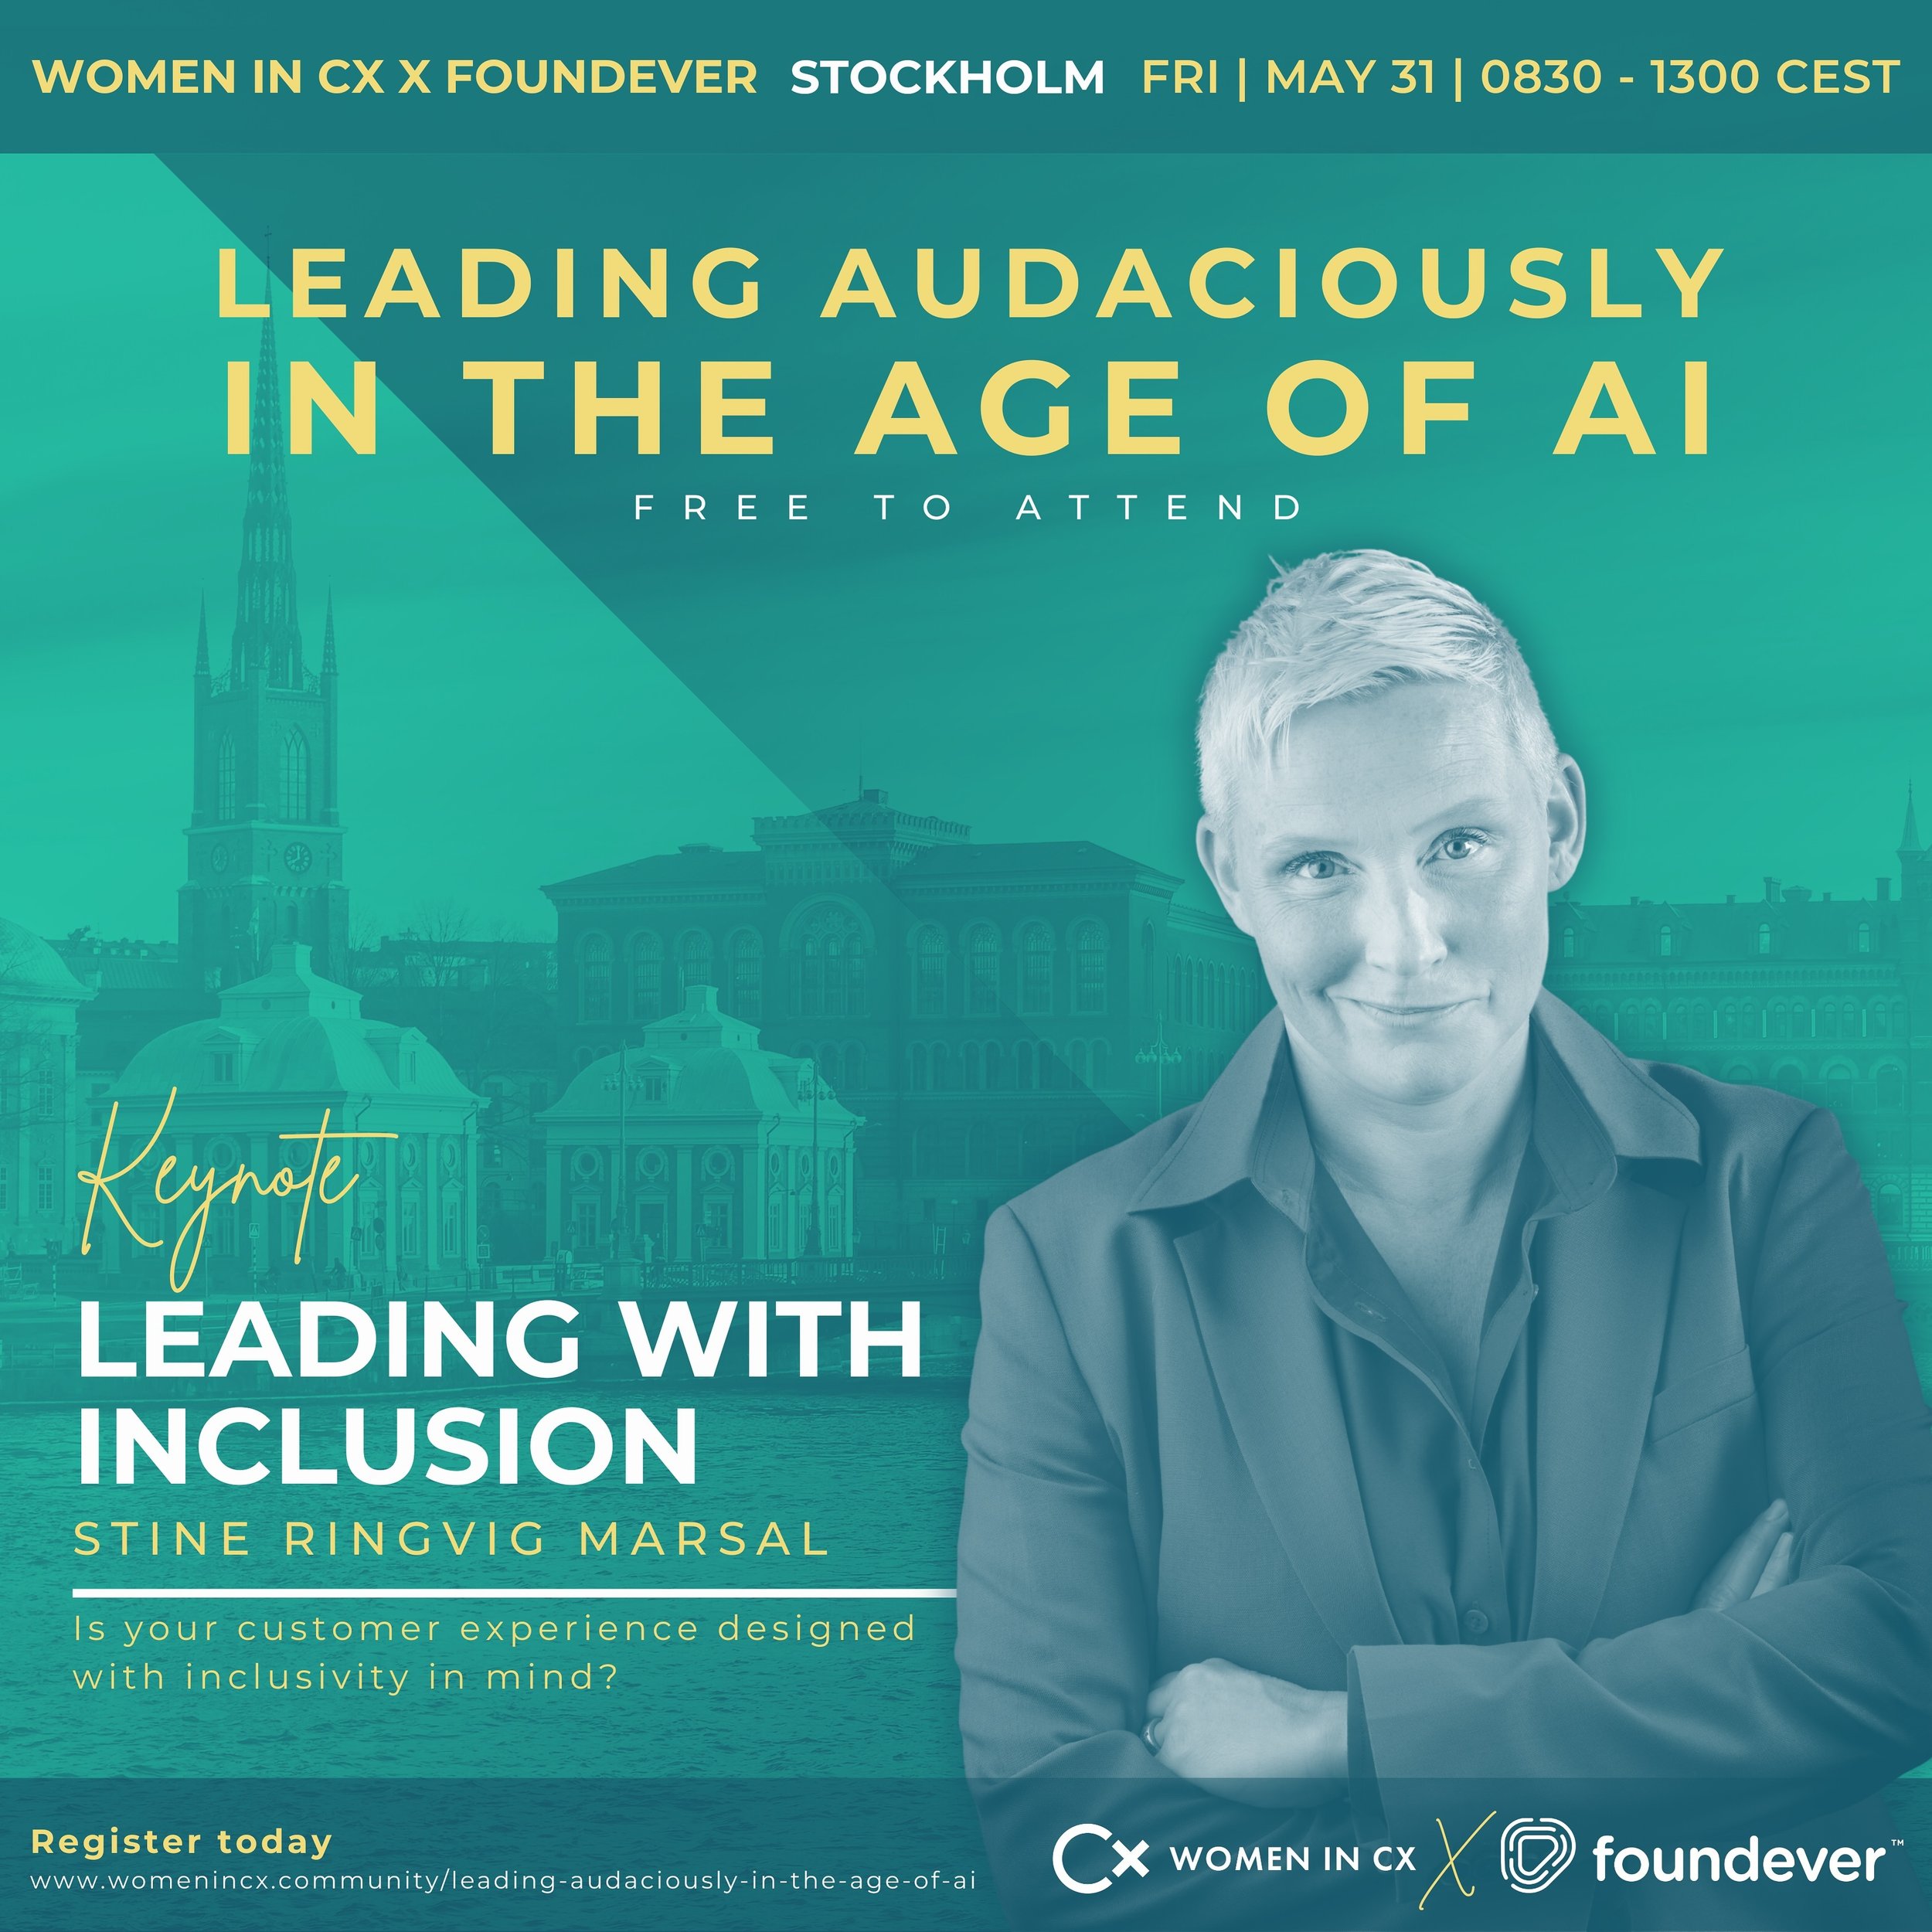 Is your customer experience designed with inclusivity in mind? 🤔
&nbsp;
Taking place at our free upcoming event in Stockholm, &lsquo;Leading Audaciously in the Age of AI&rsquo;, join Stine Ringvig Marsal as she delivers her exclusive keynote, &lsquo